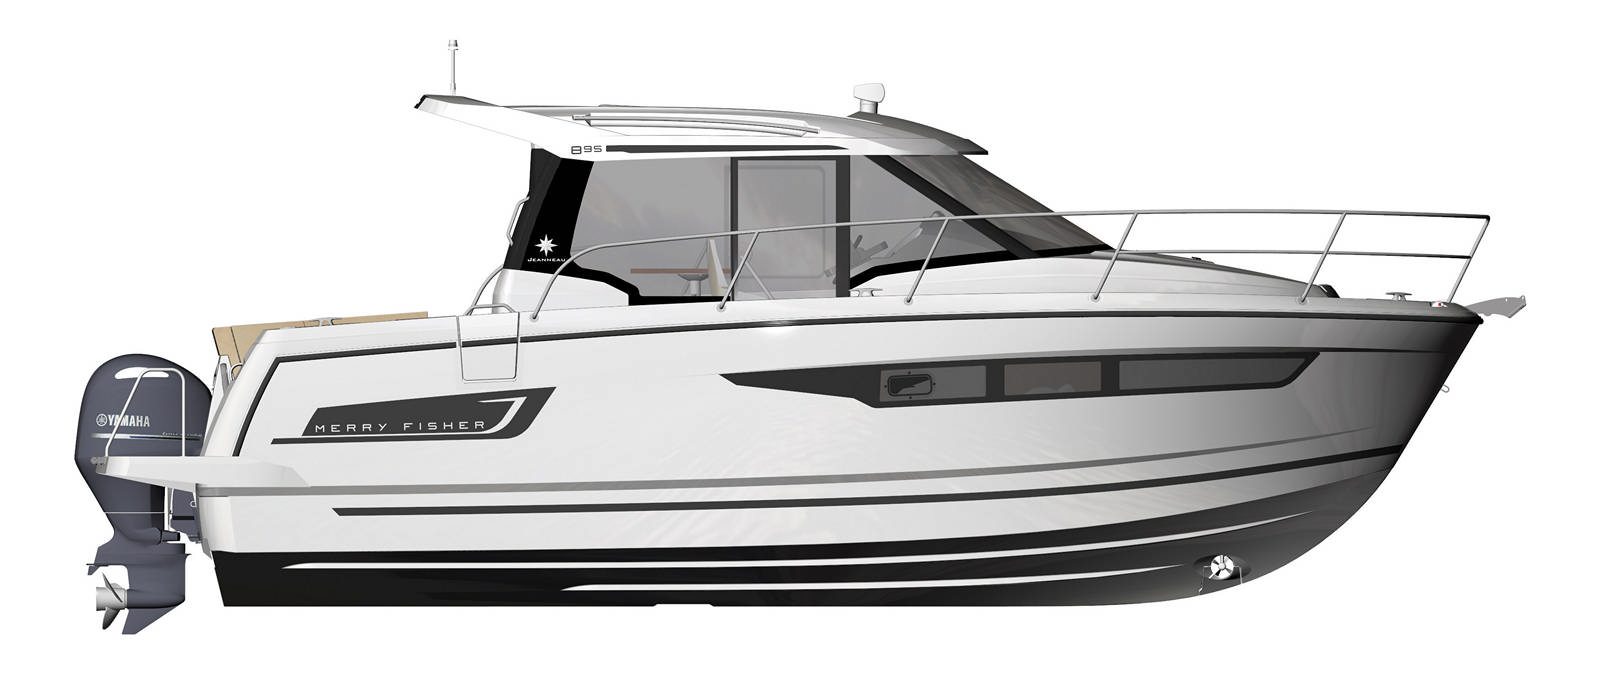 Jeanneau Merry Fisher 895 - Stream Yachts 